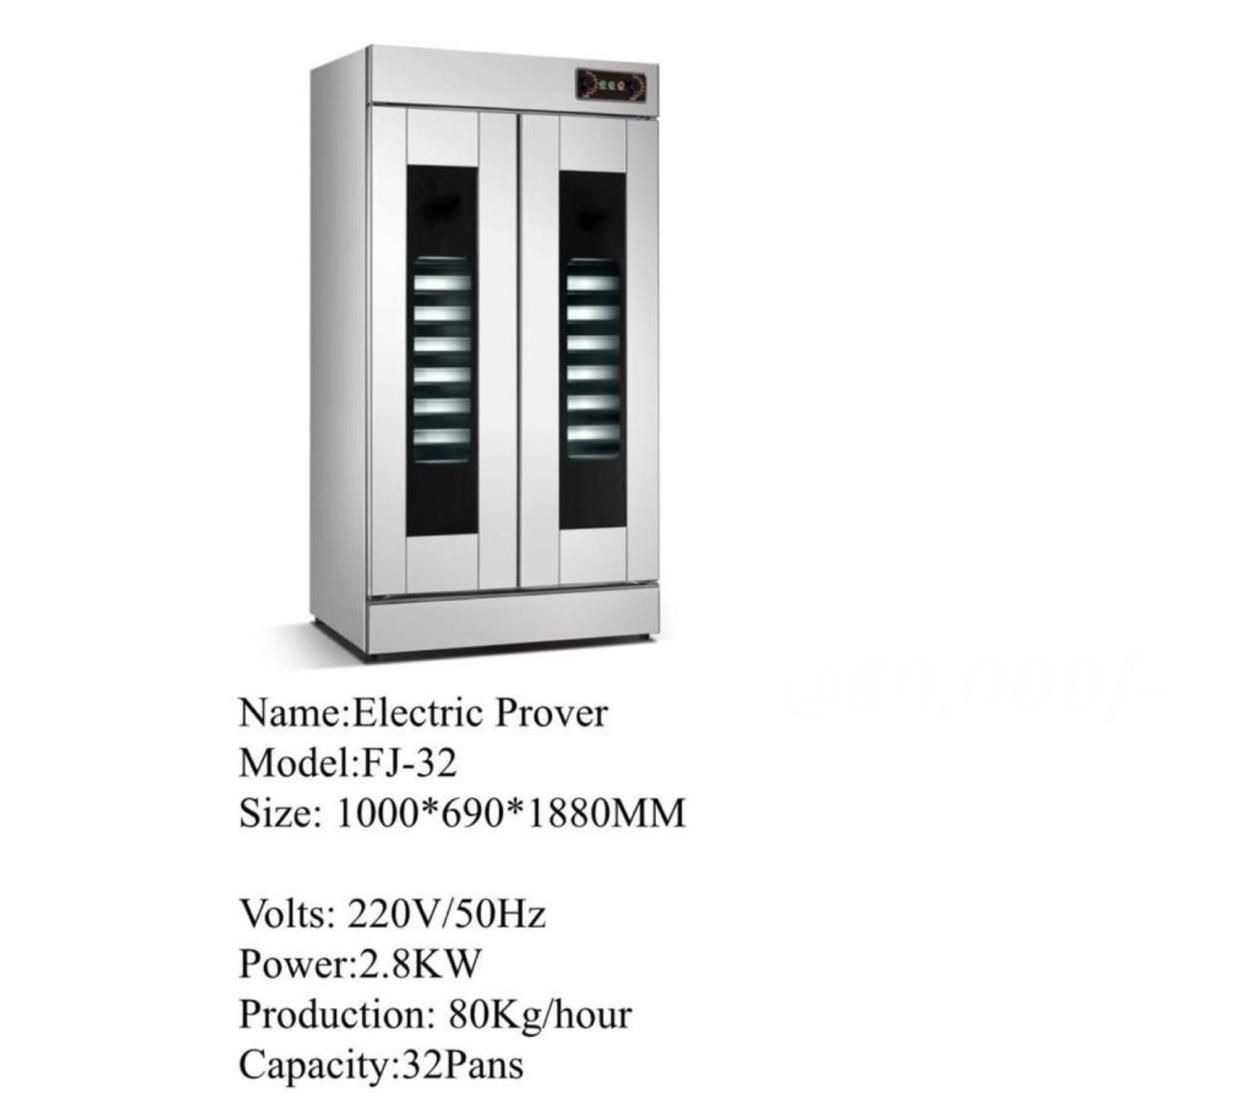 Special offer for premier electric pover